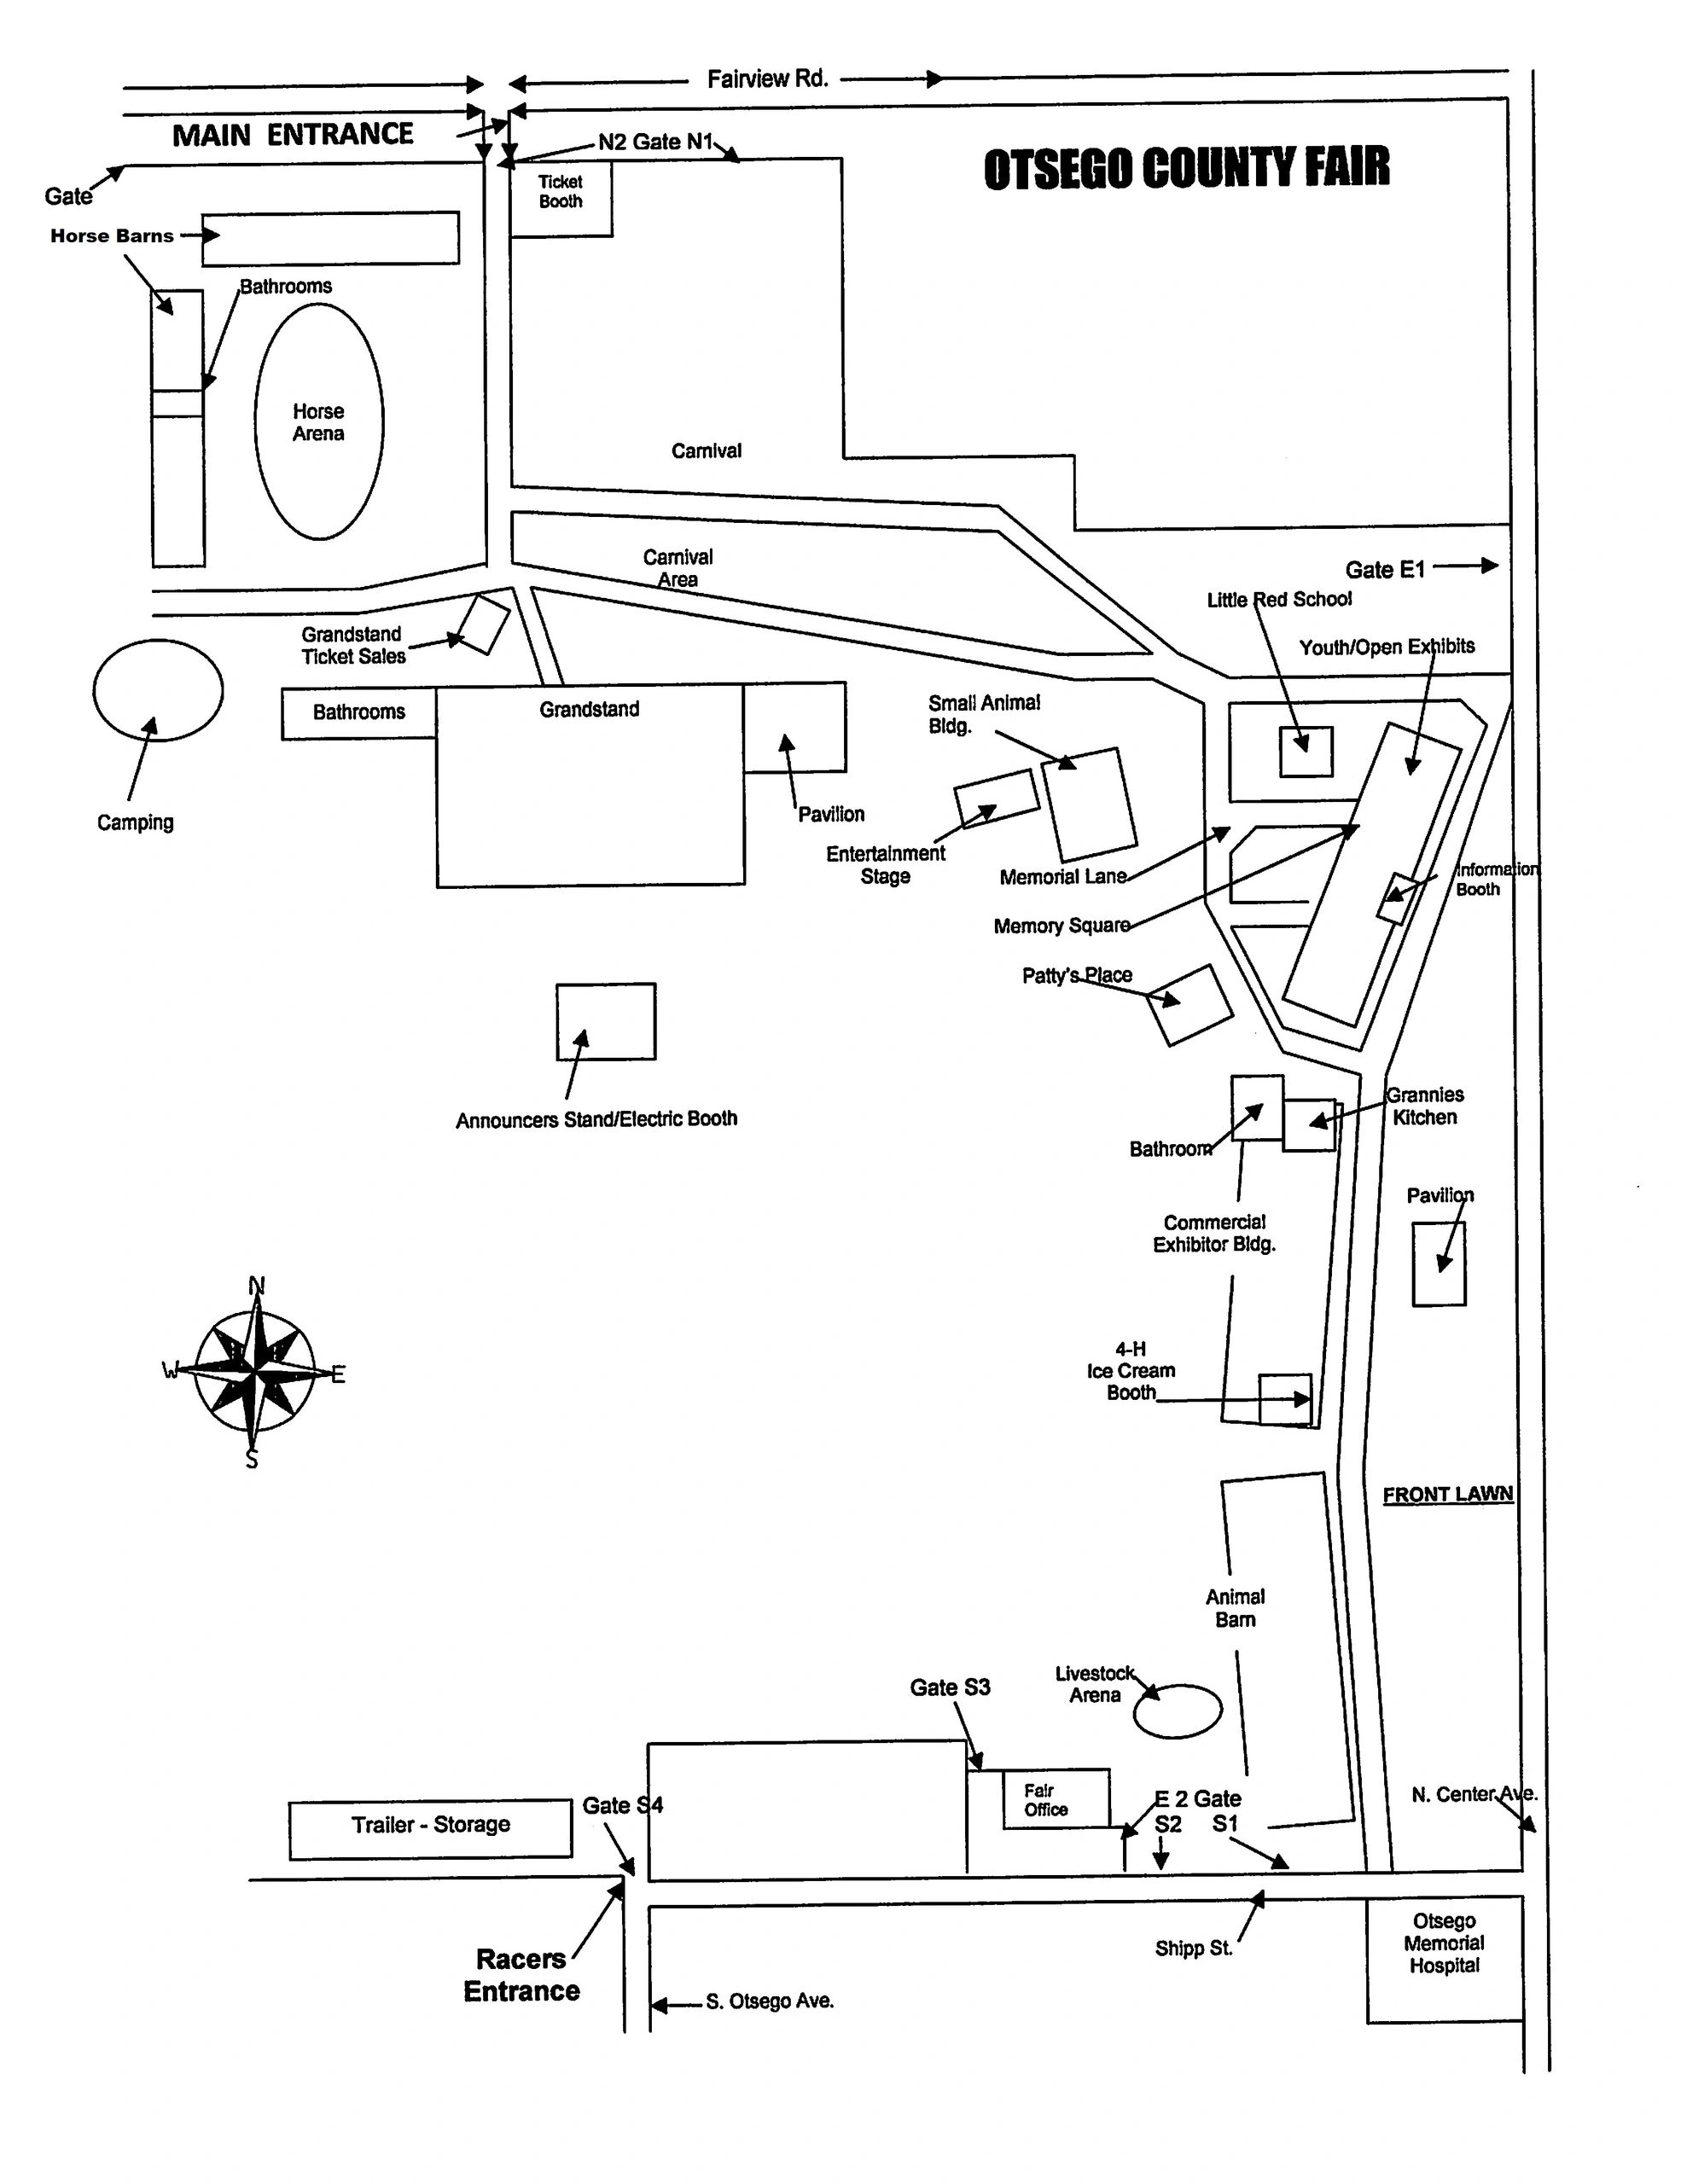 Map of fairgrounds